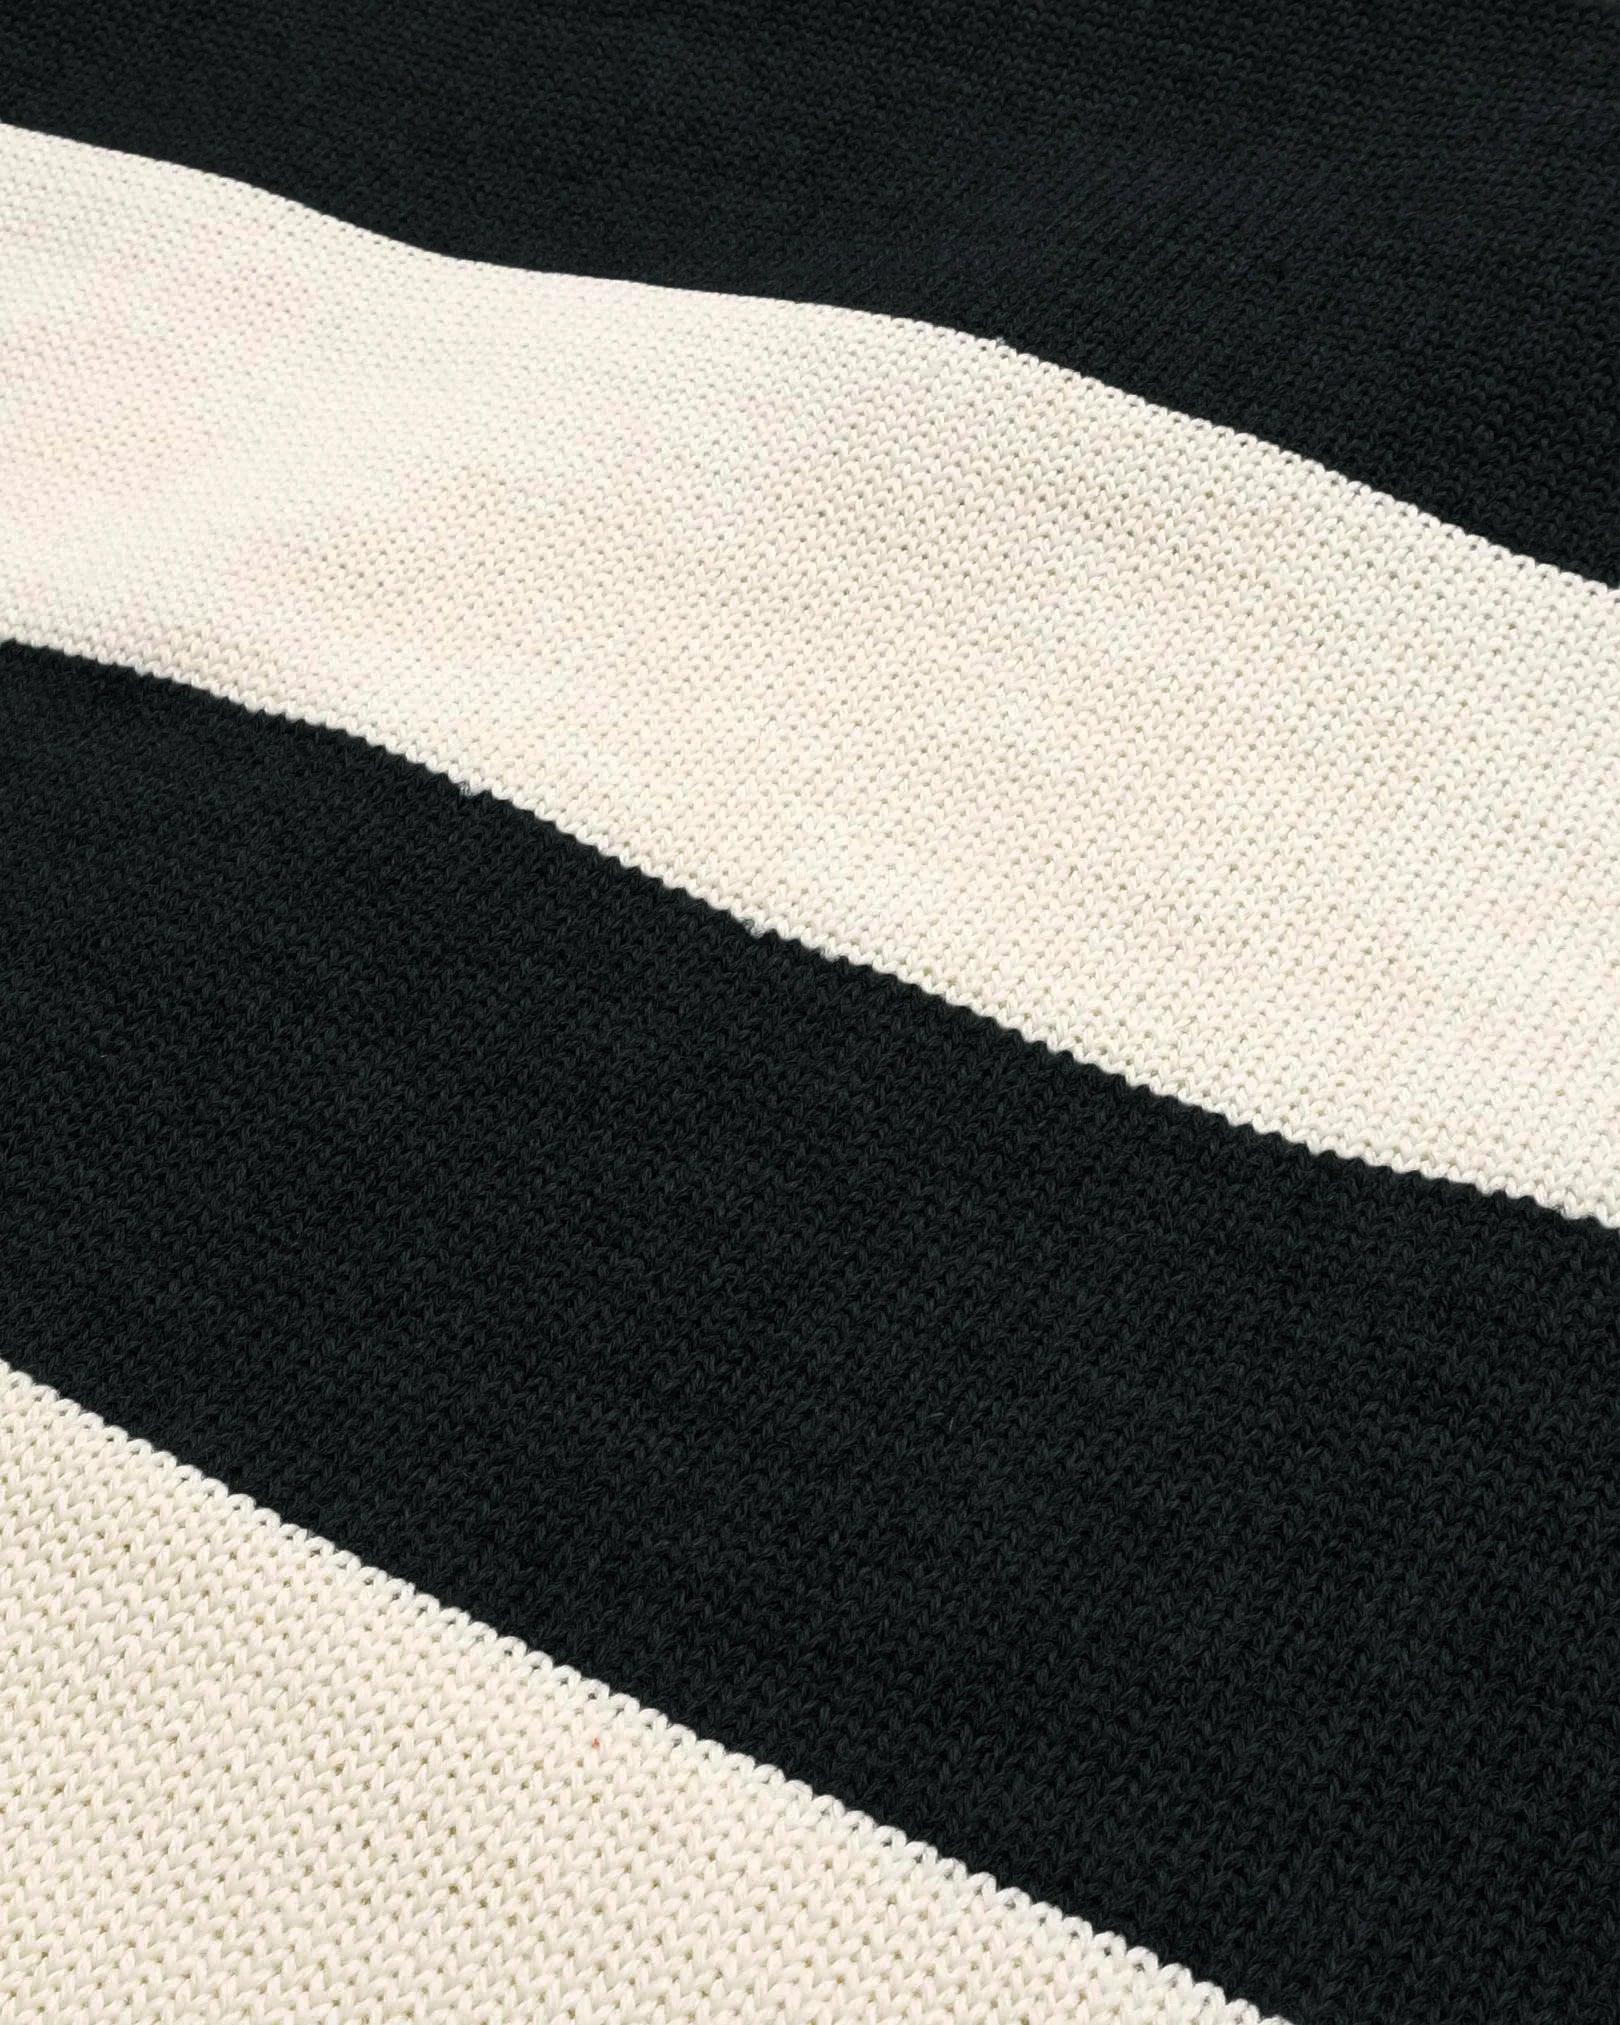 Dehen 1920 Striped Naval Crewneck Sweater - Black/White - Guilty Party